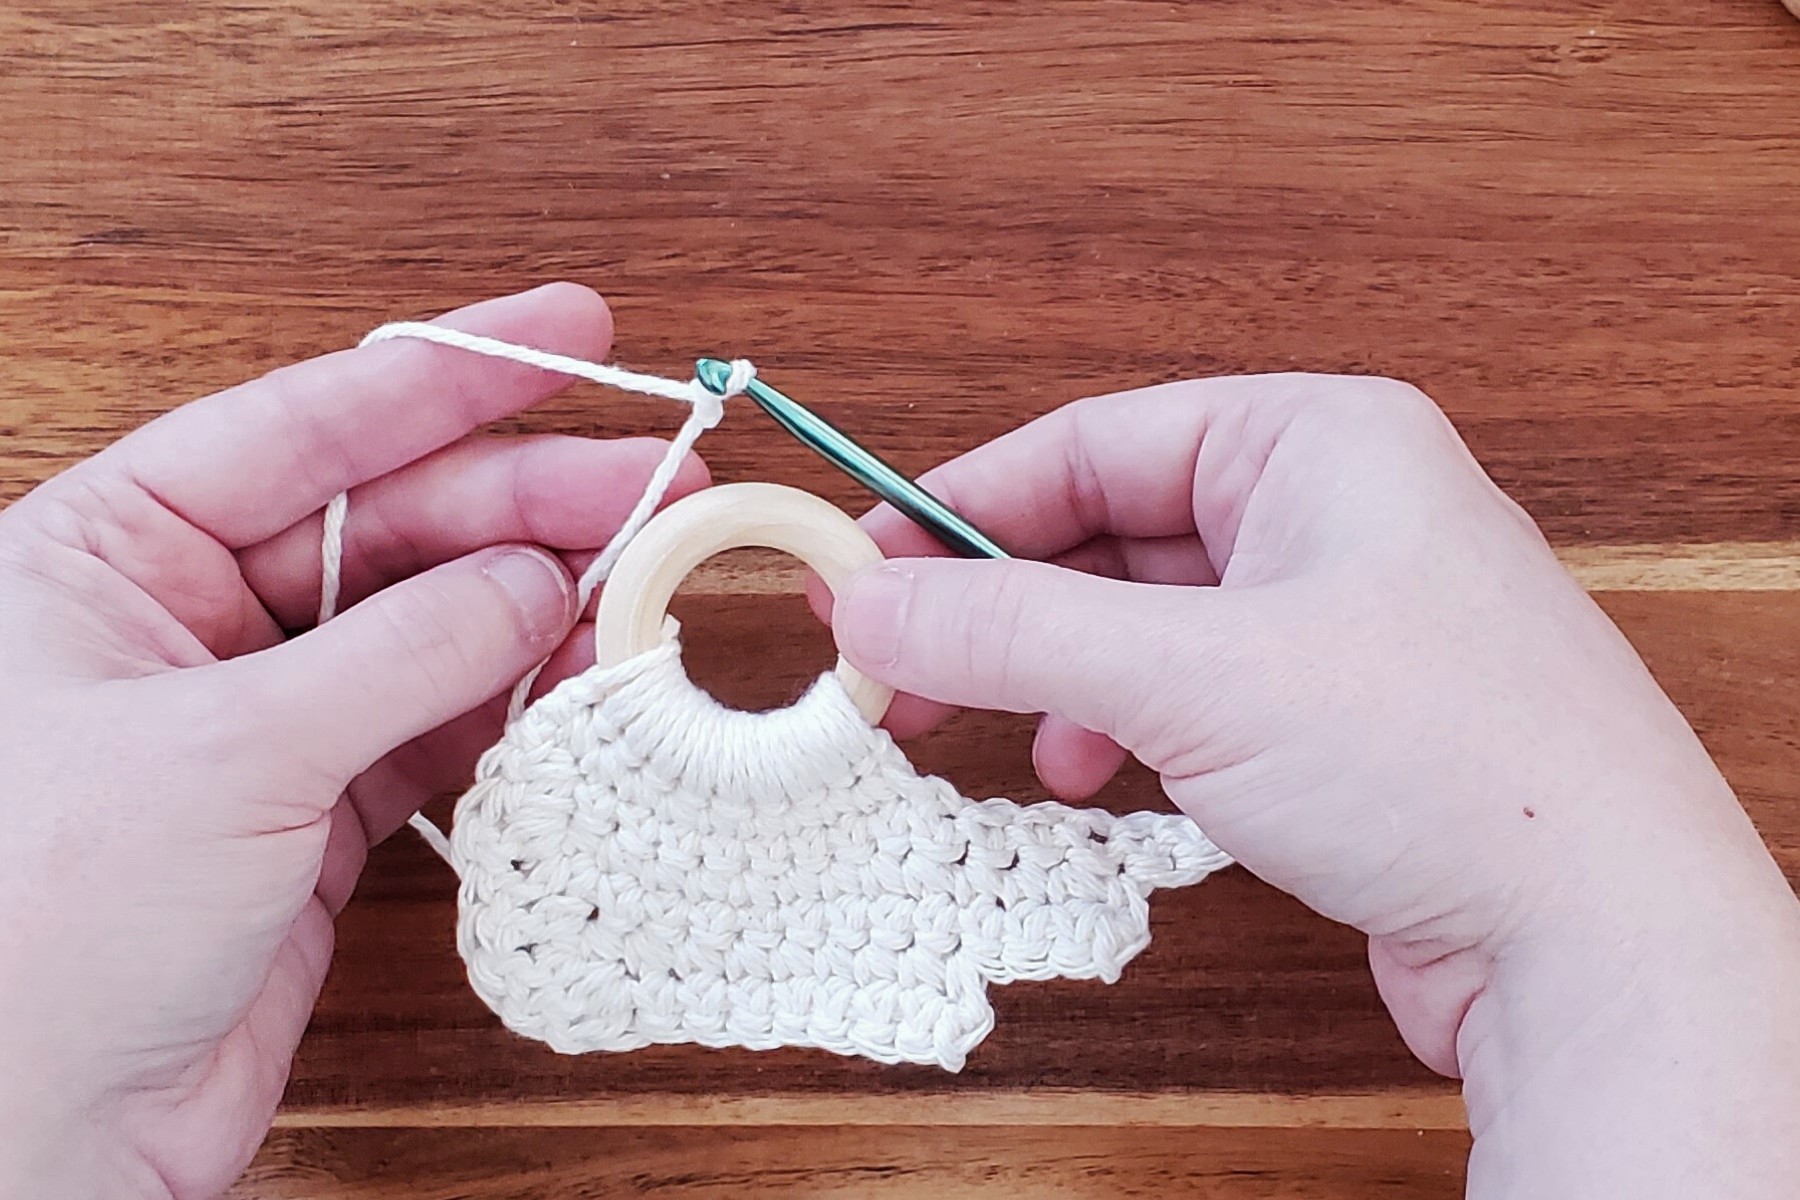 Turn ring over and repeat steps for second wing of your crochet angel ornament